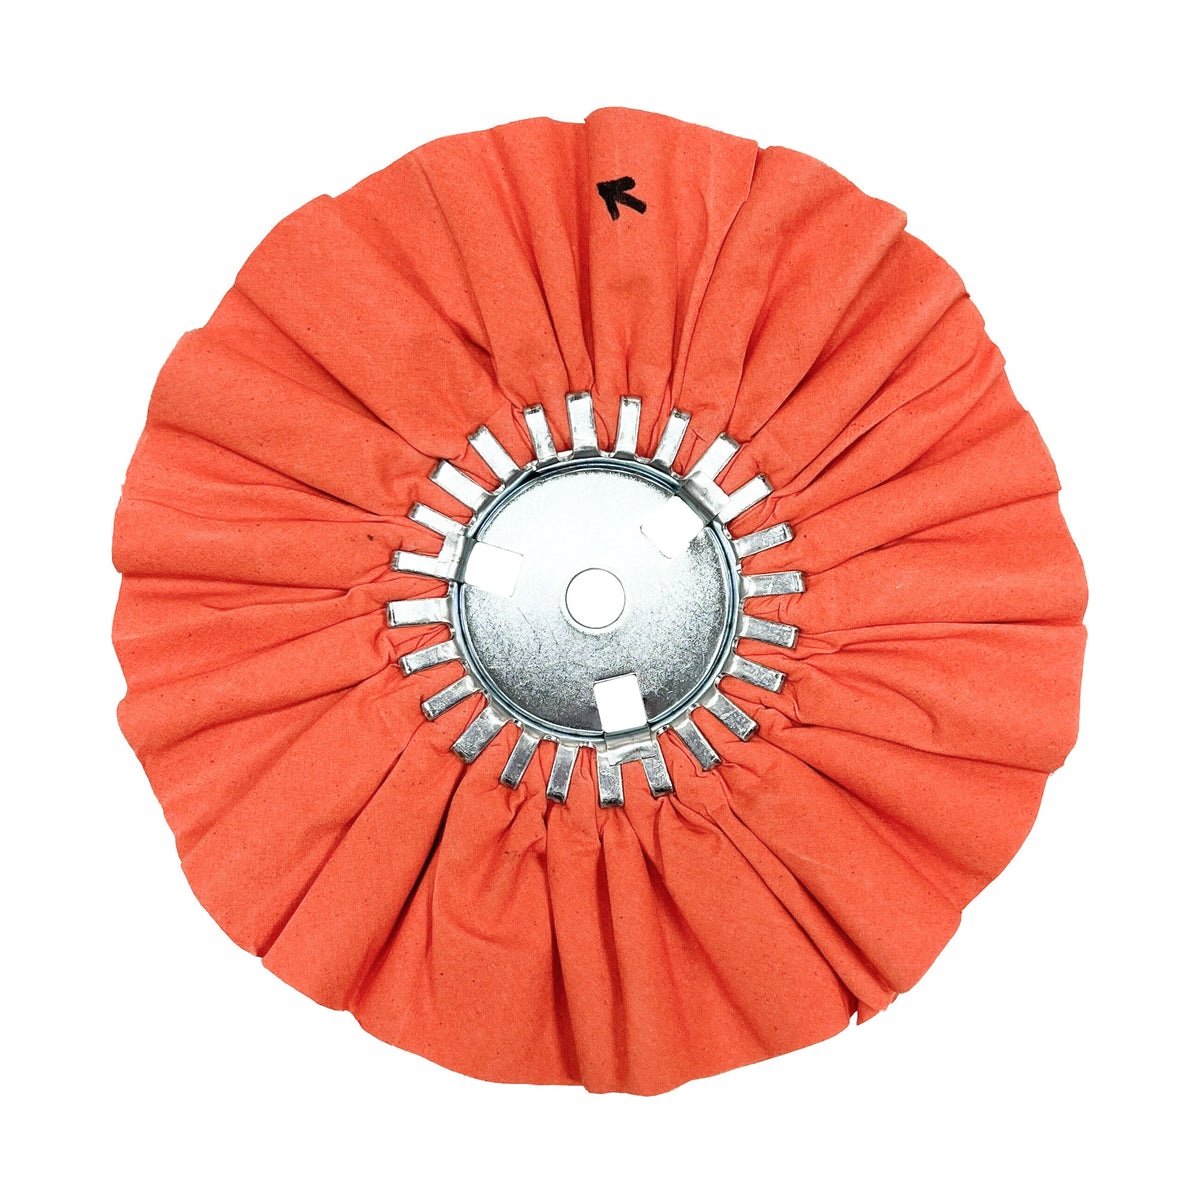 Renegade Products USA 10&quot; Orange Airway Buffing Wheel with Center Plate - Professional Buffing Tool for Precise Polishing and Finishing